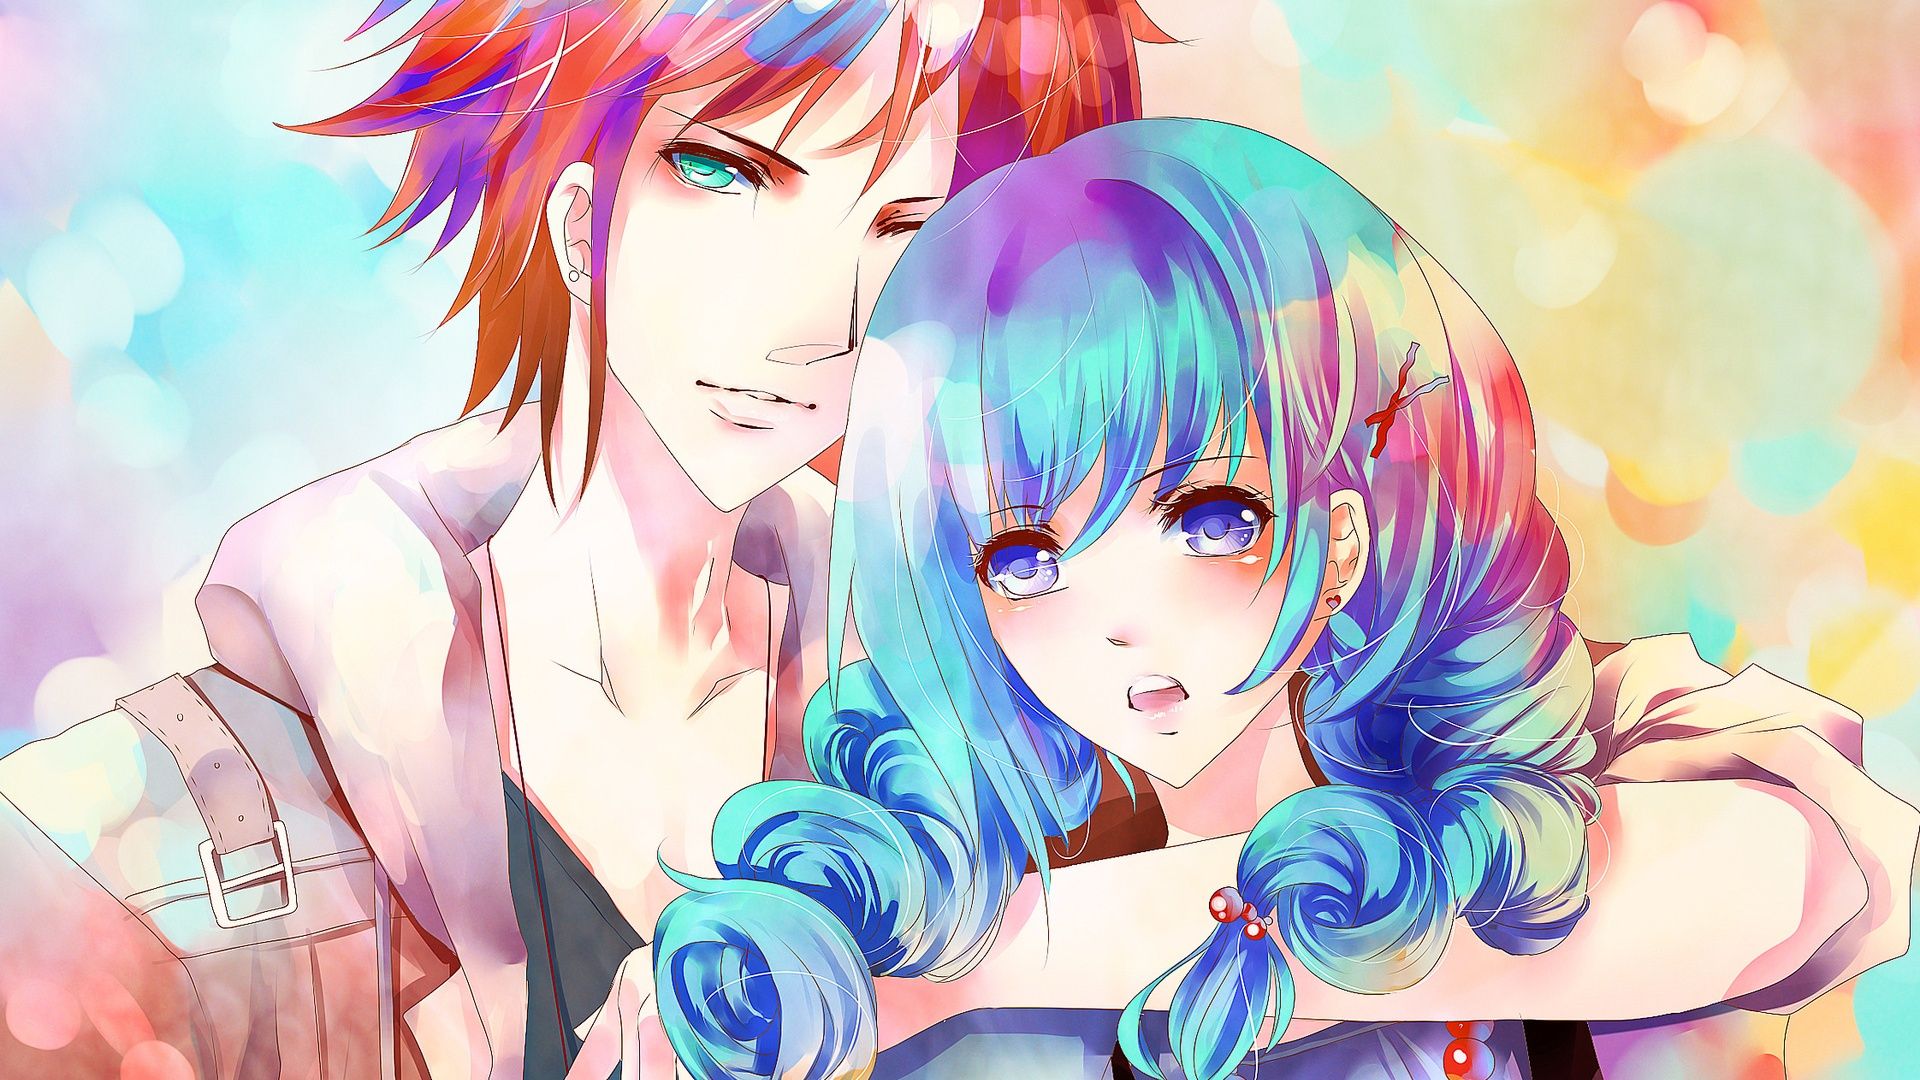 Wallpaper Blue hair anime girl with a boy 1920x1200 HD Picture, Image